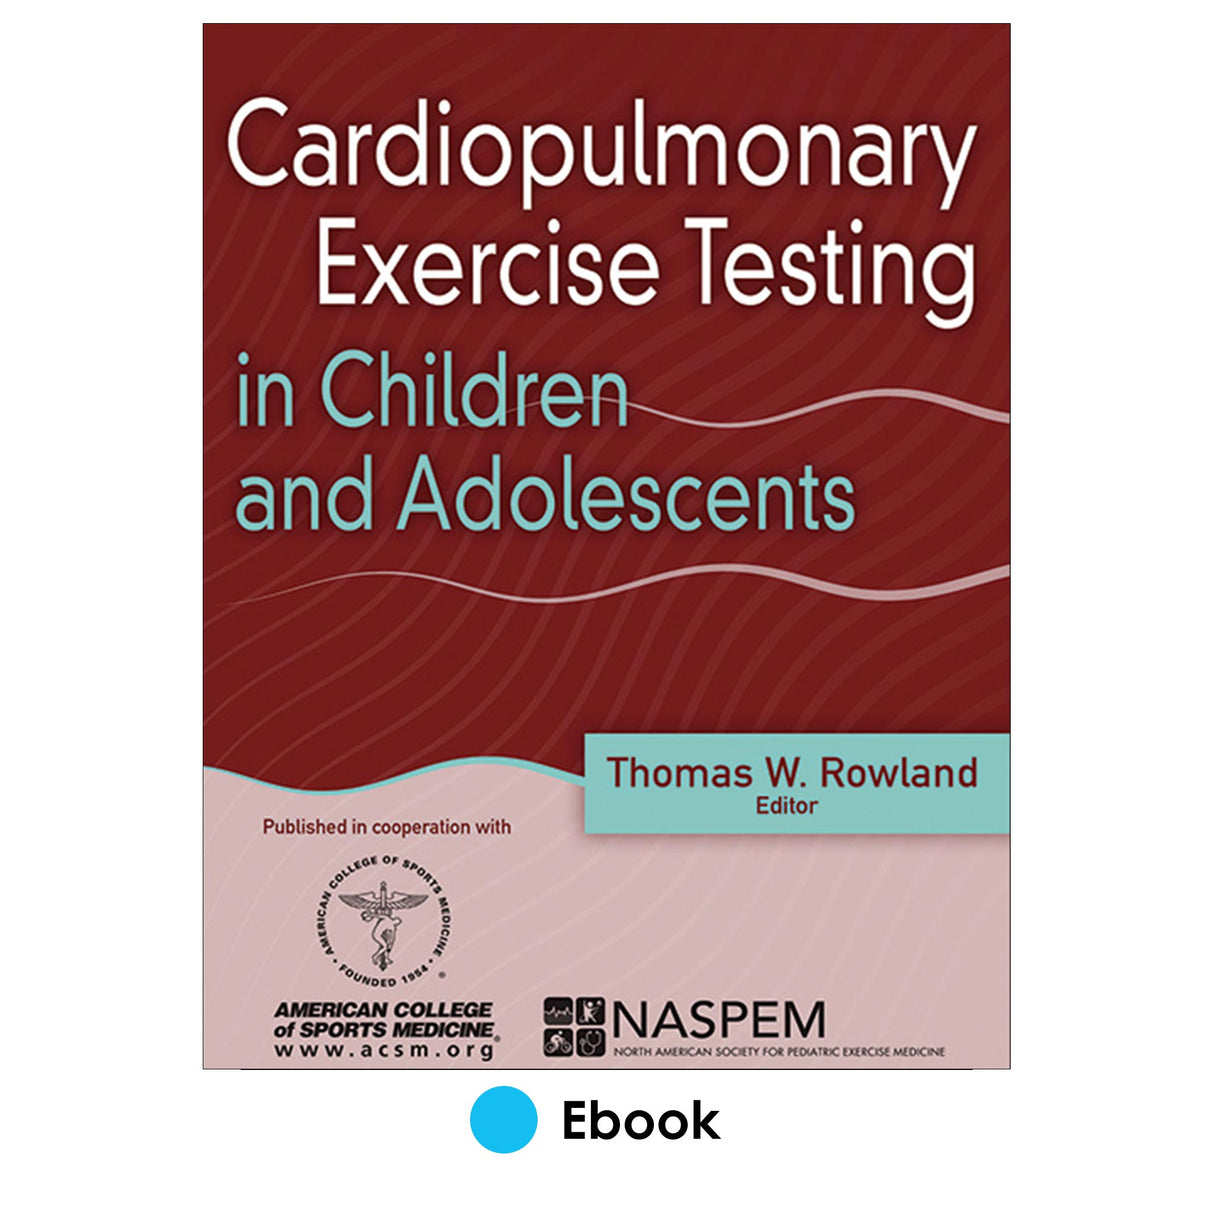 Cardiopulmonary Exercise Testing in Children and Adolescents PDF